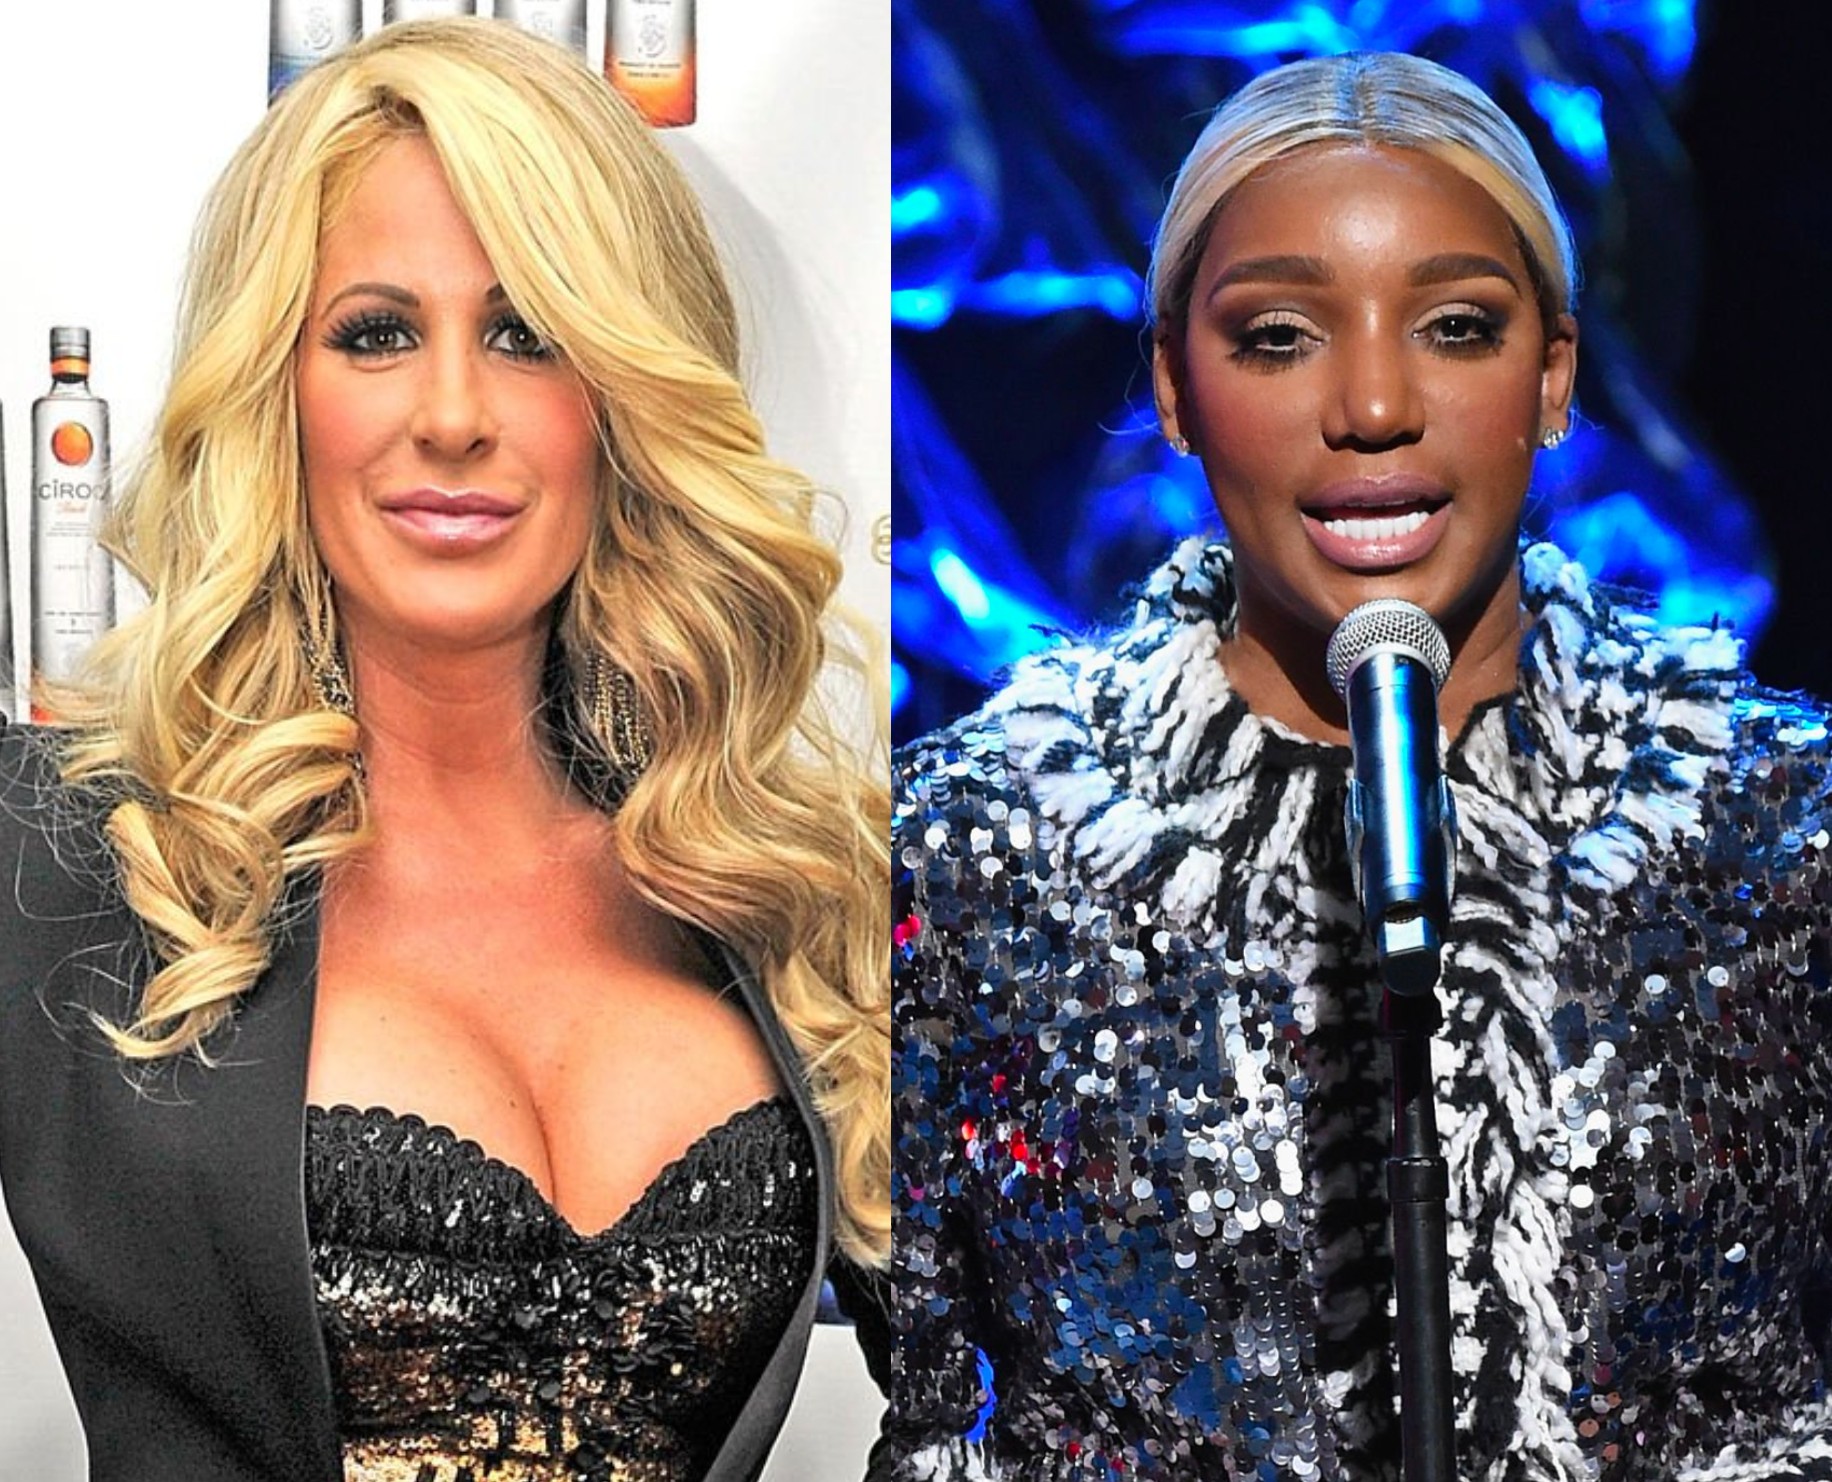 Kim Zolciak-Biermann Answers Nene Leakes Racism Allegations: “I’ll Deal With Her”